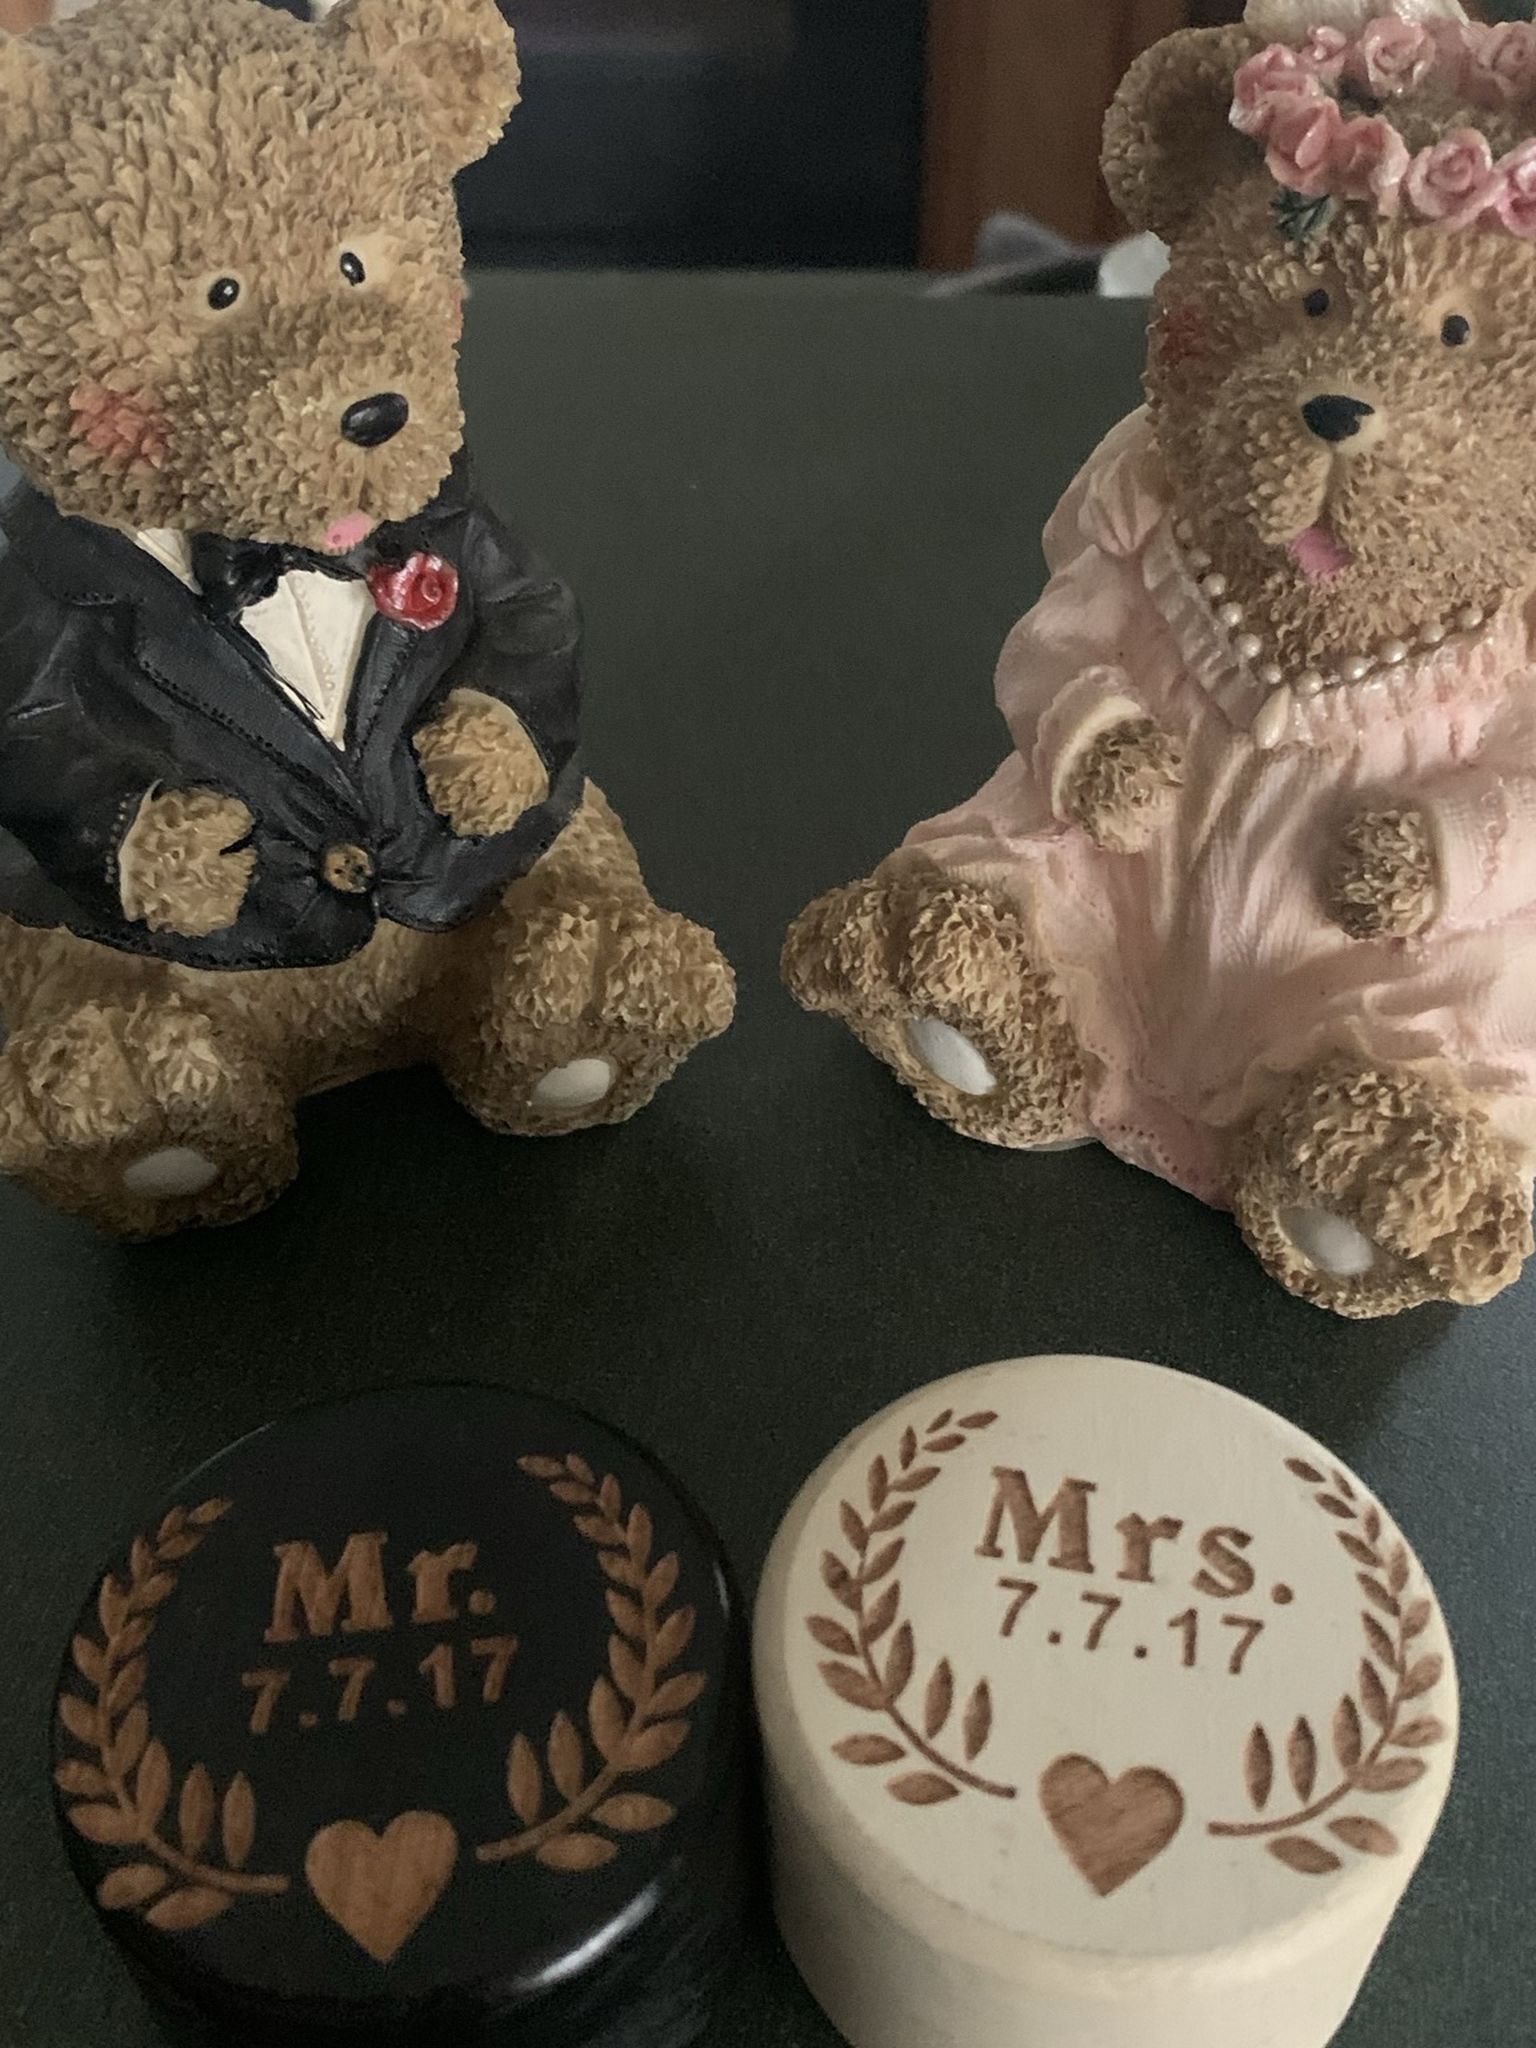 Wedding Ring Holders 7/7/17 And His & Hers Wedding Bear Decor